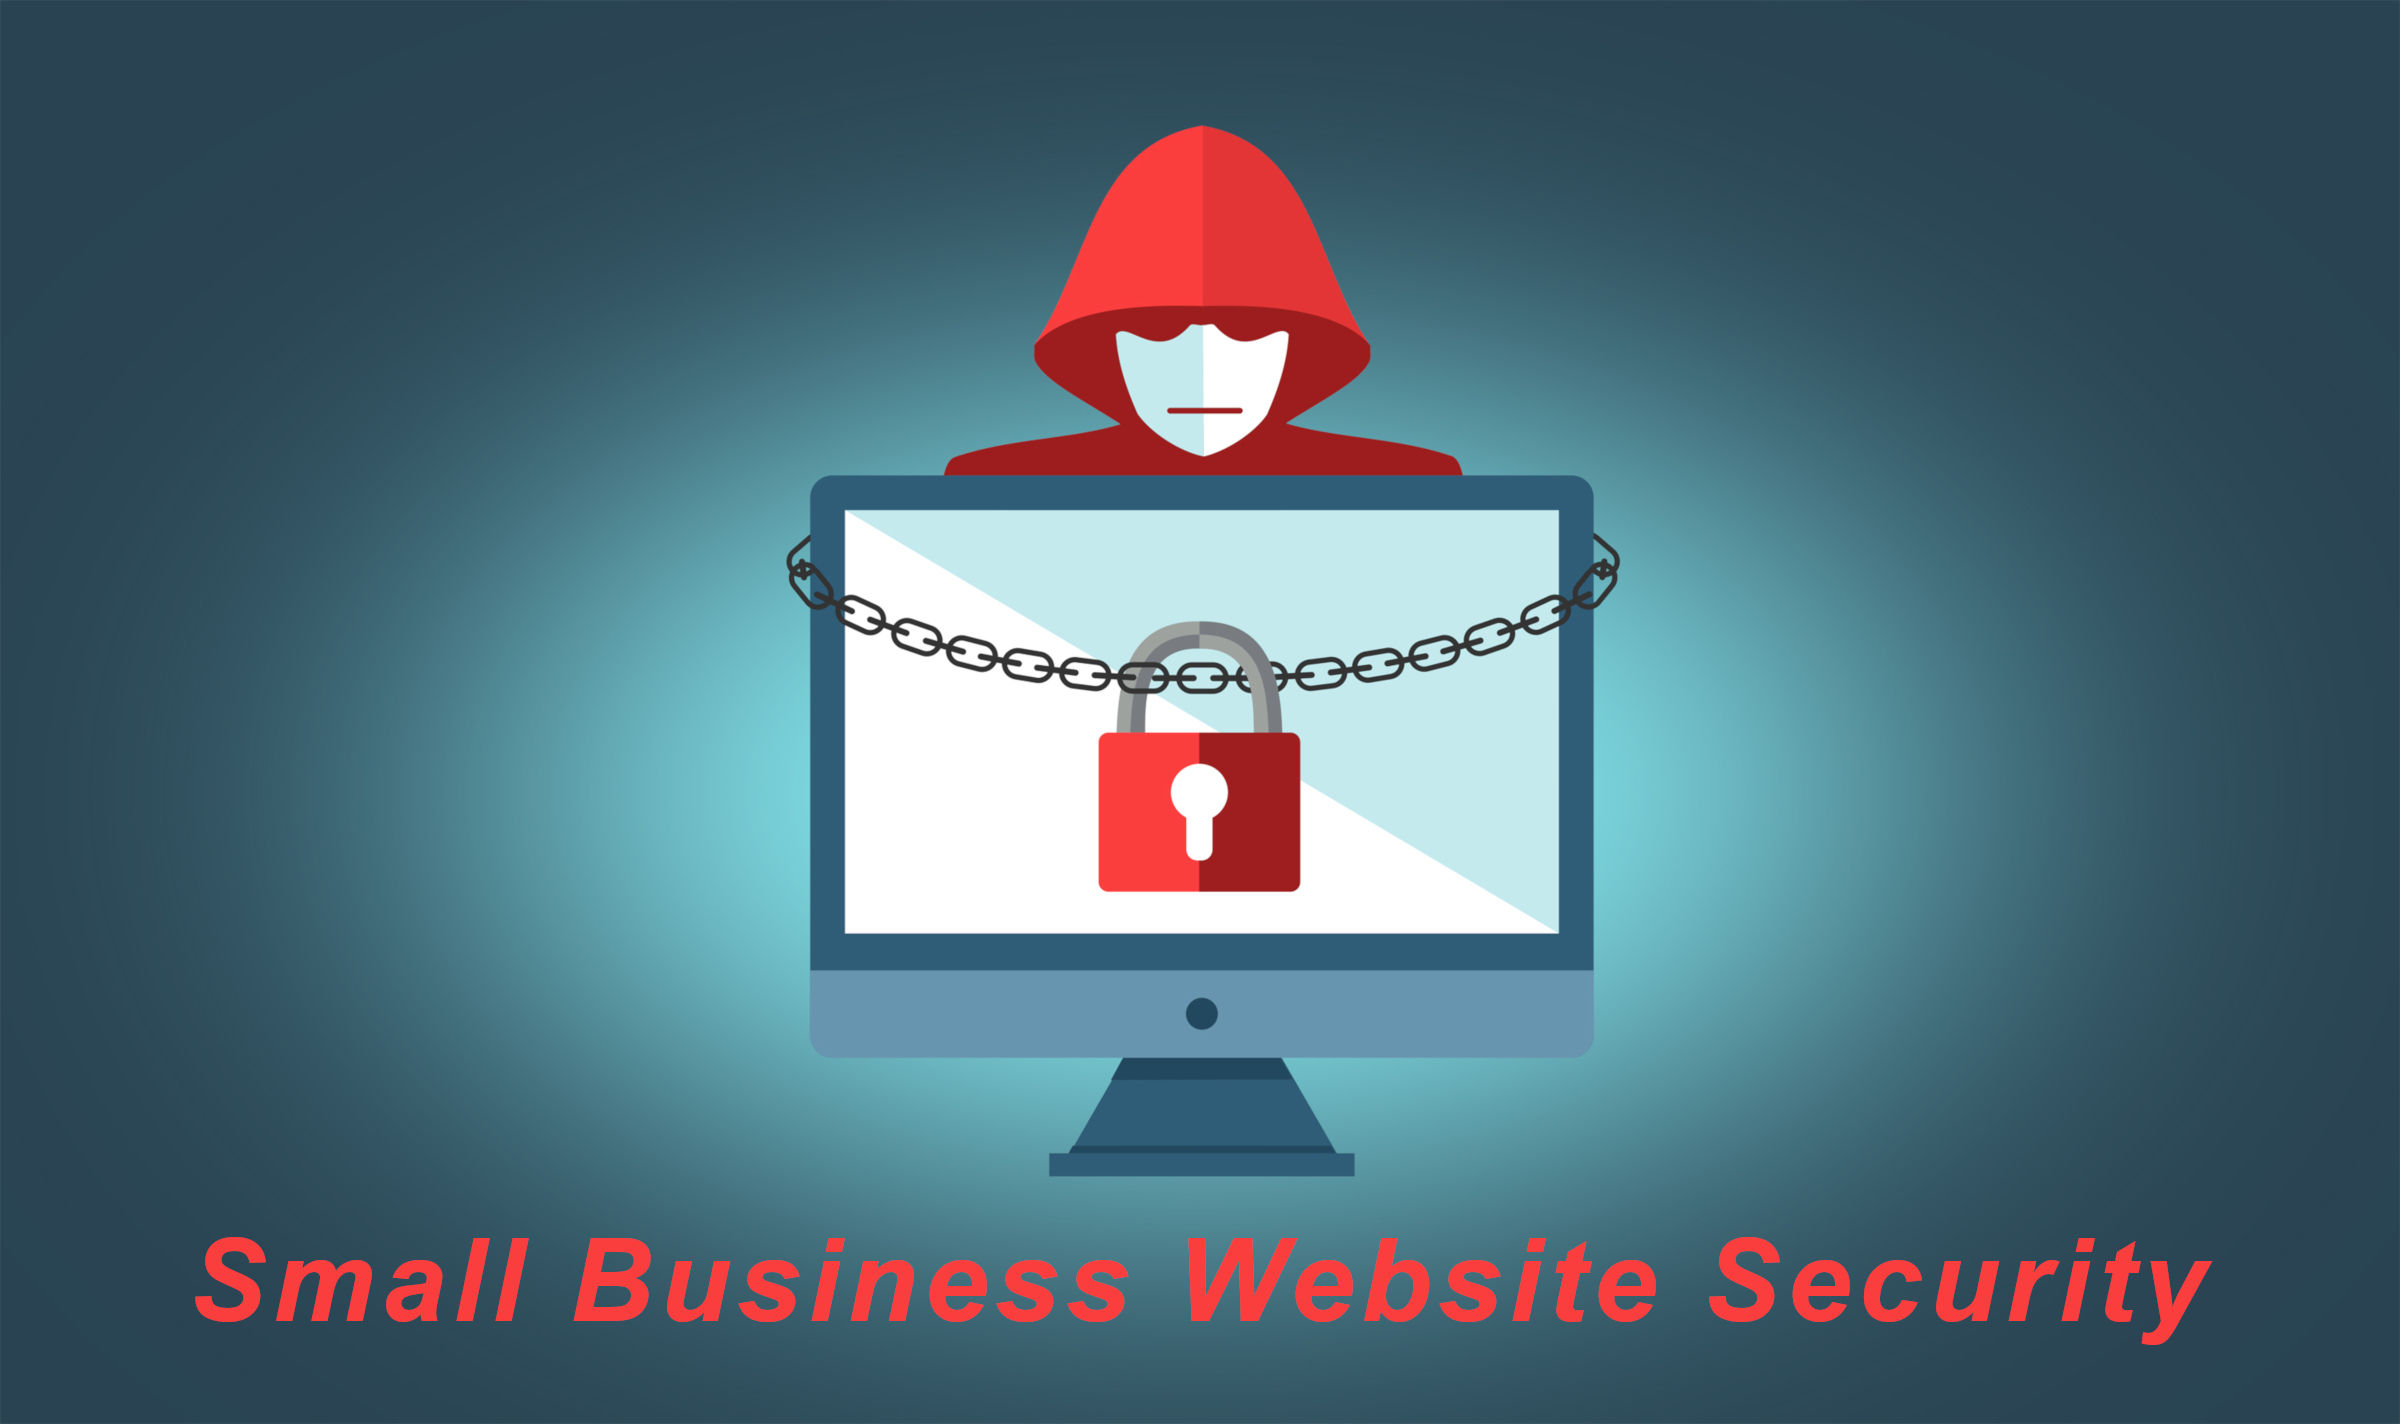 Small Business Website Security Services